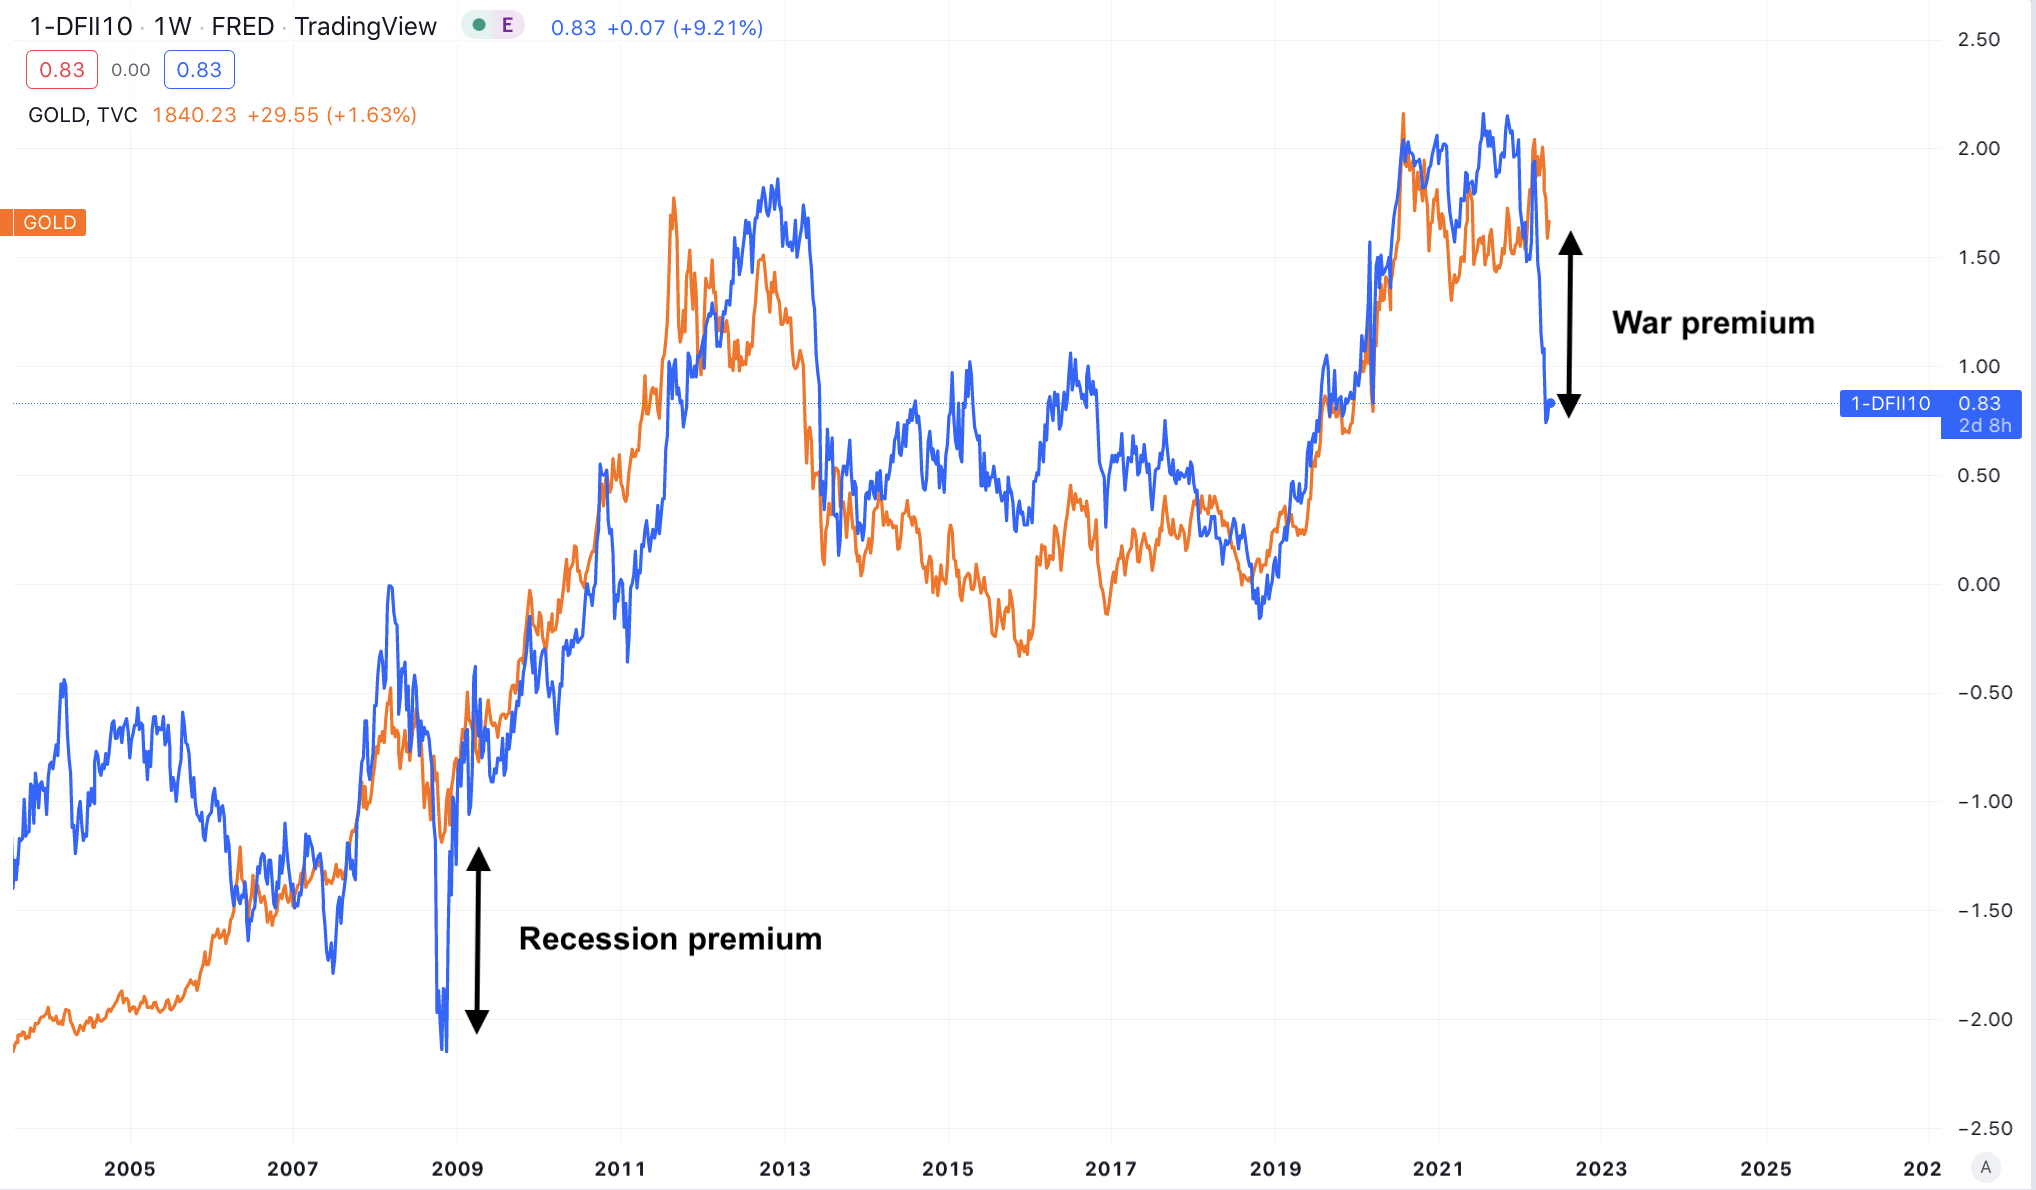 Gold Holds Crucial Technical Levels Despite Rising Real Yields | War Premium Turning into a Recession Premium?